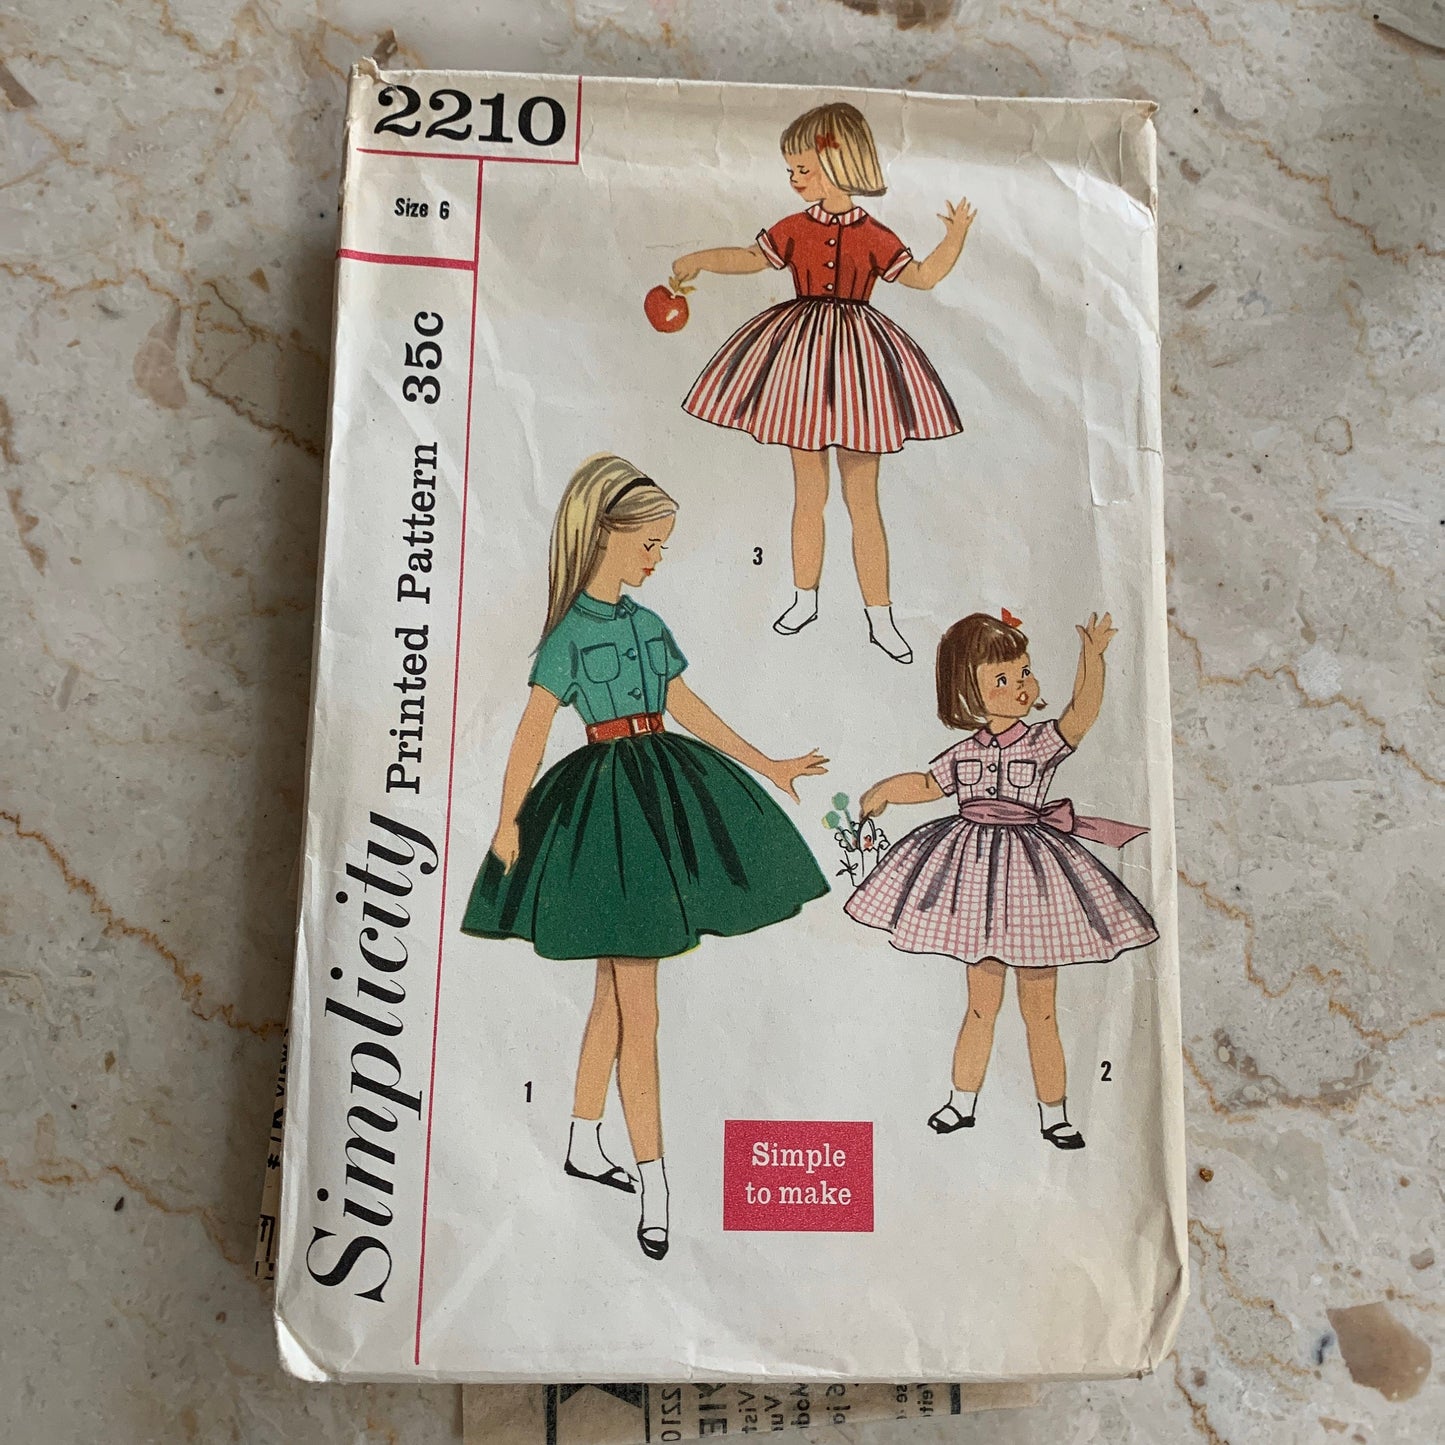 Girl’s Size 6 Short Sleeved Dress Vintage Sewing Pattern Simplicity 2210